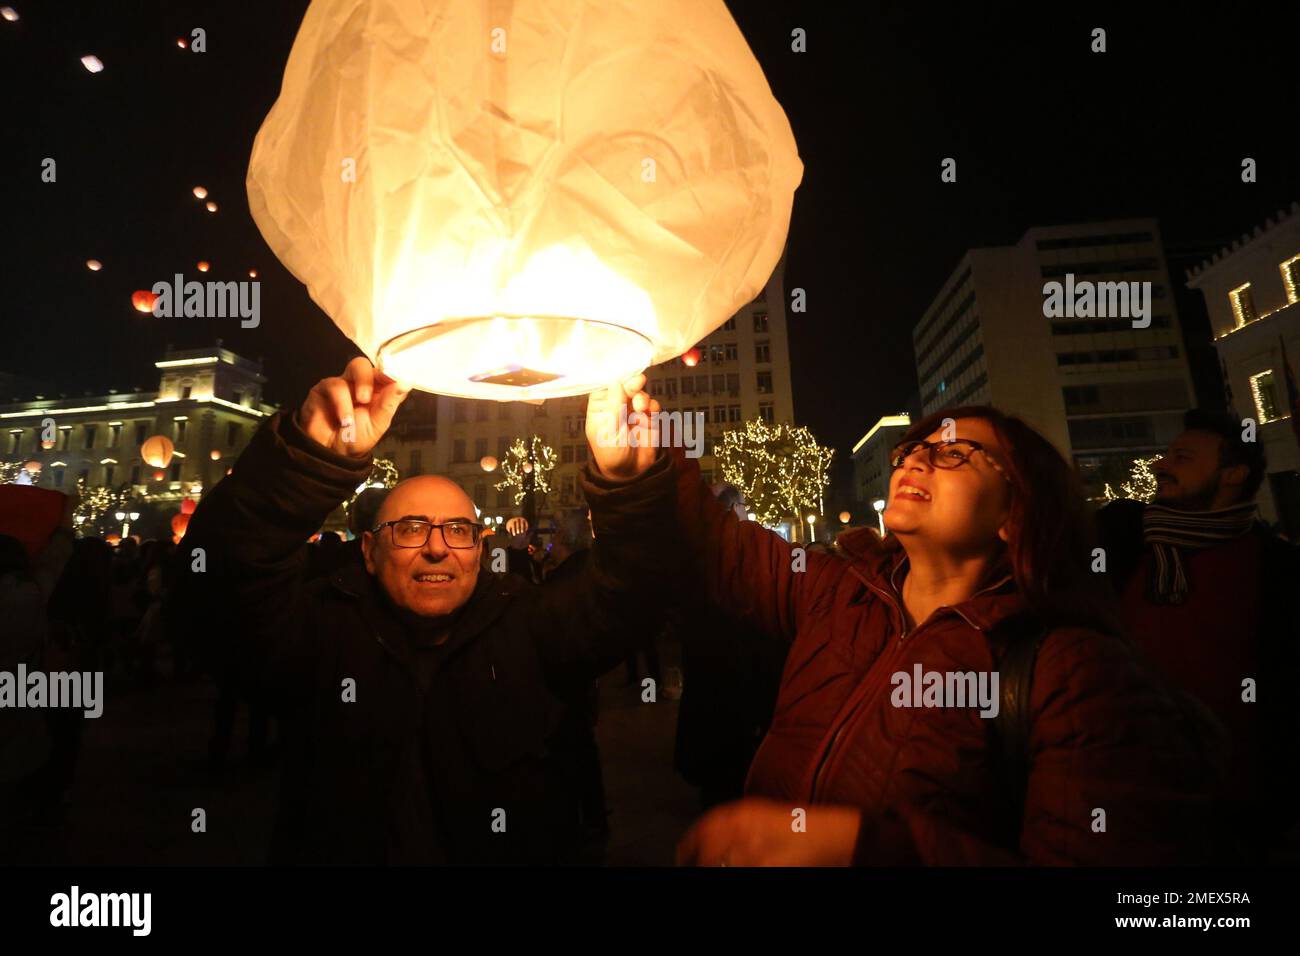 People light sky lanterns during the Christmas festivity 'Night ofWishes' outside the City Hall in Athens. Stock Photo